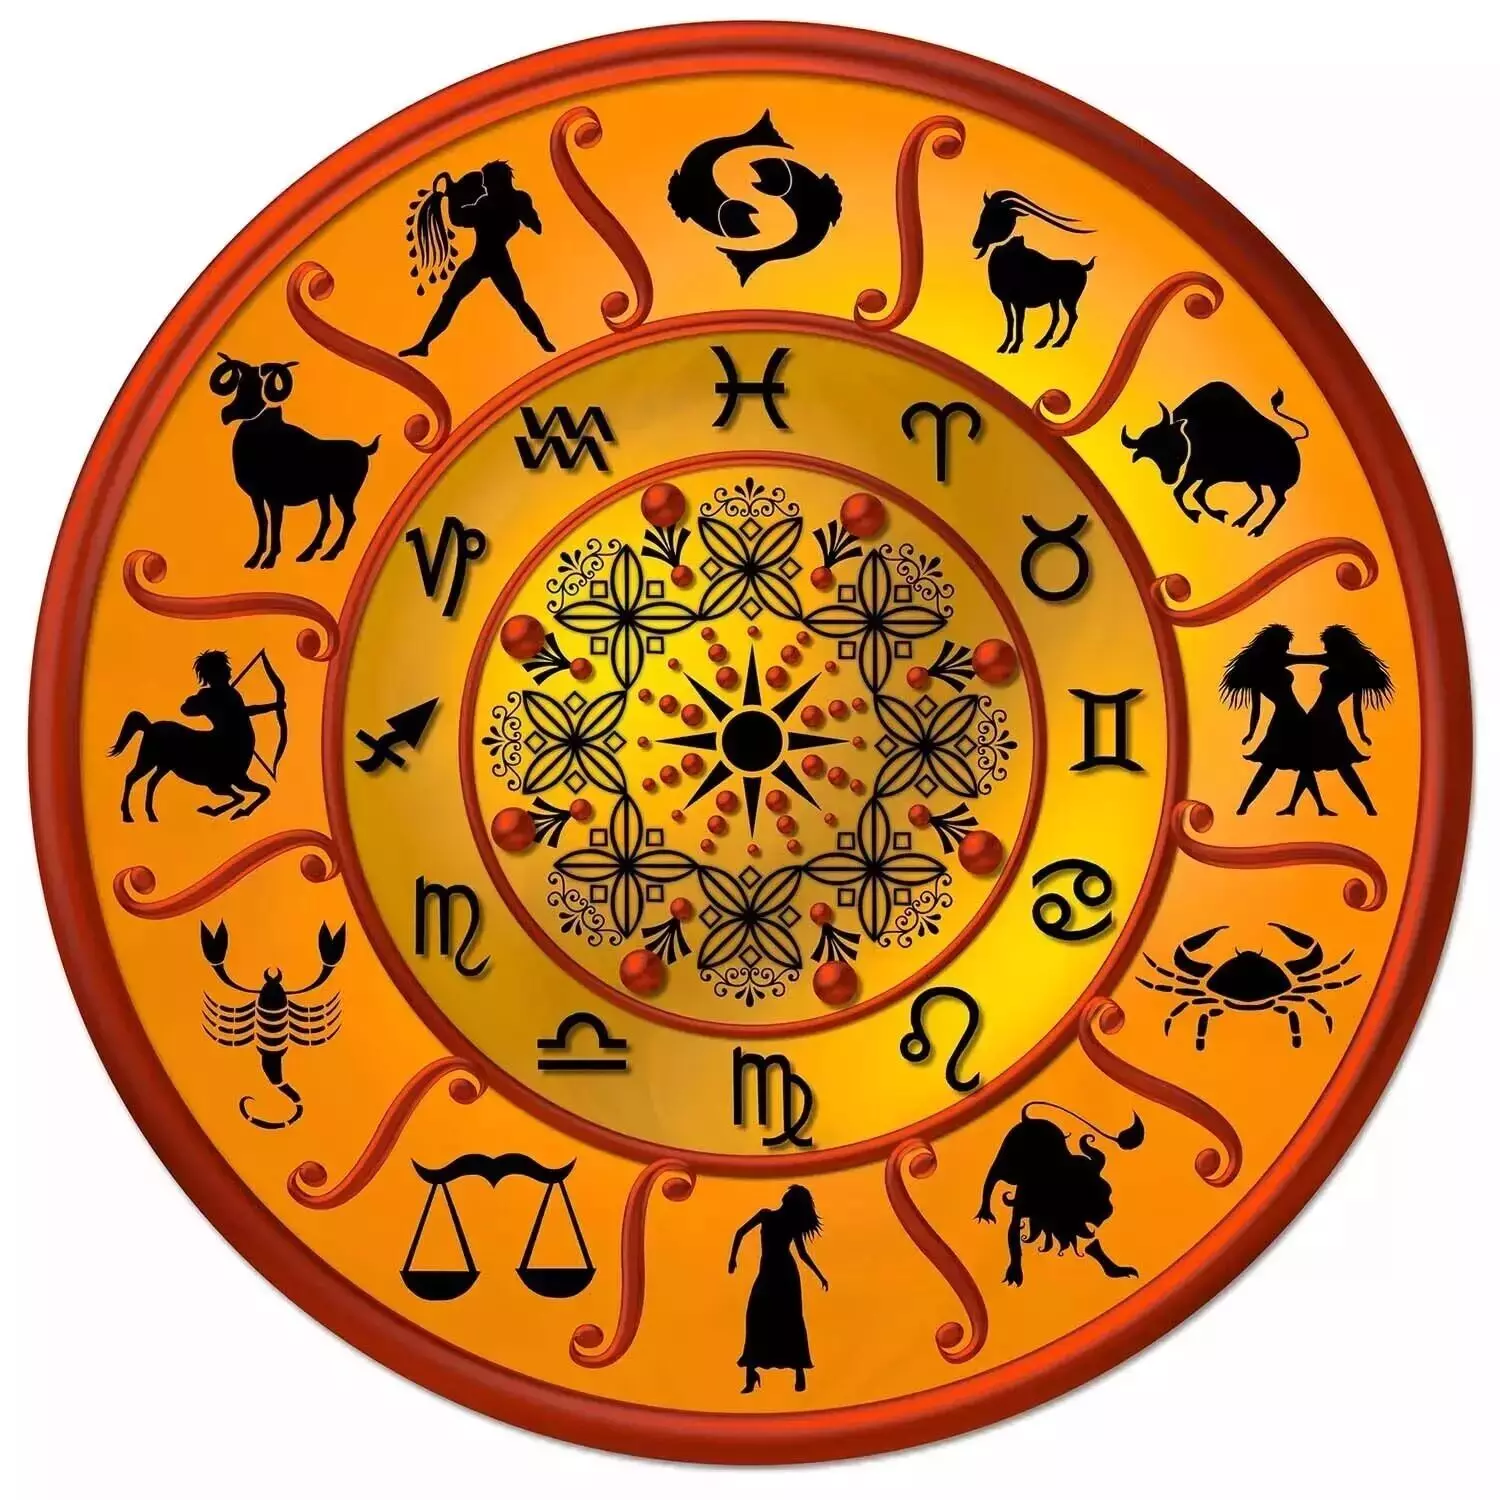 04 February  – Know your todays horoscope